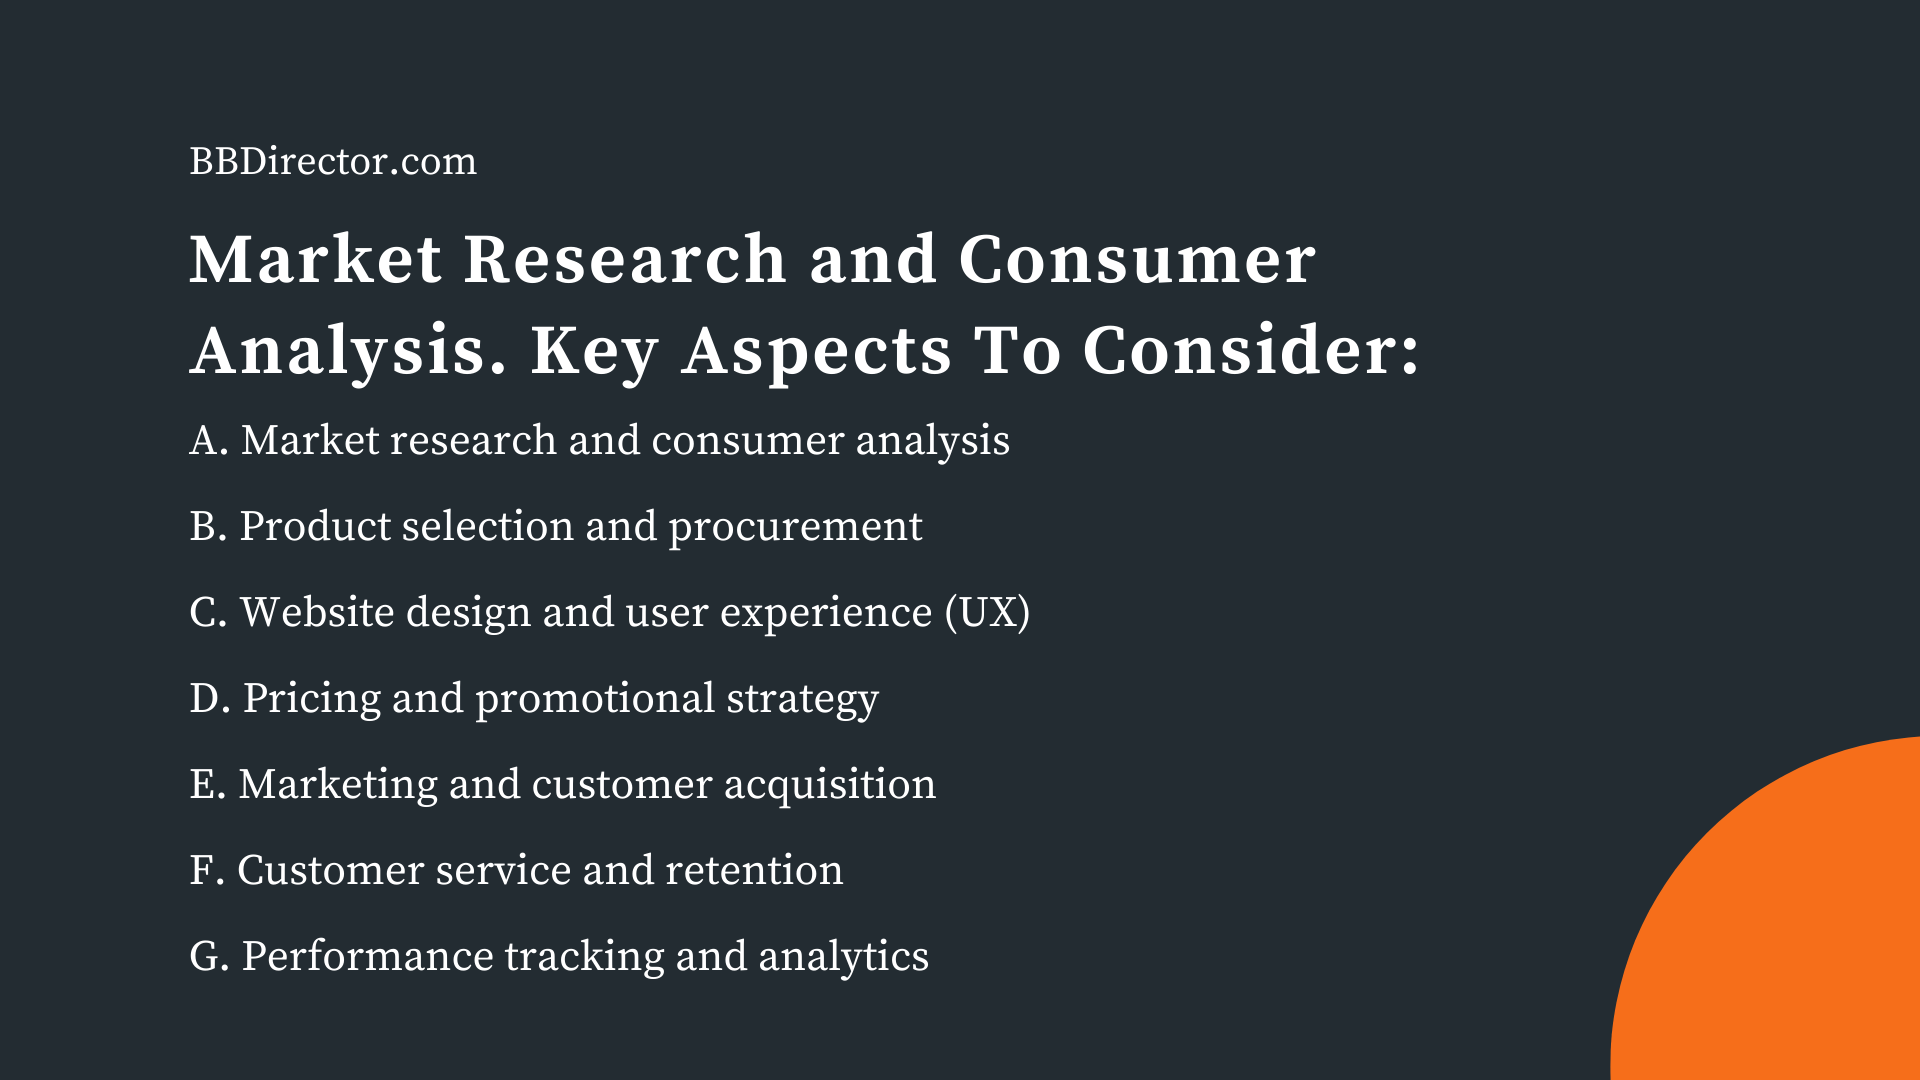 key aspects to consider when building your market research and consumer analysis, as part of your ecommerce strategy